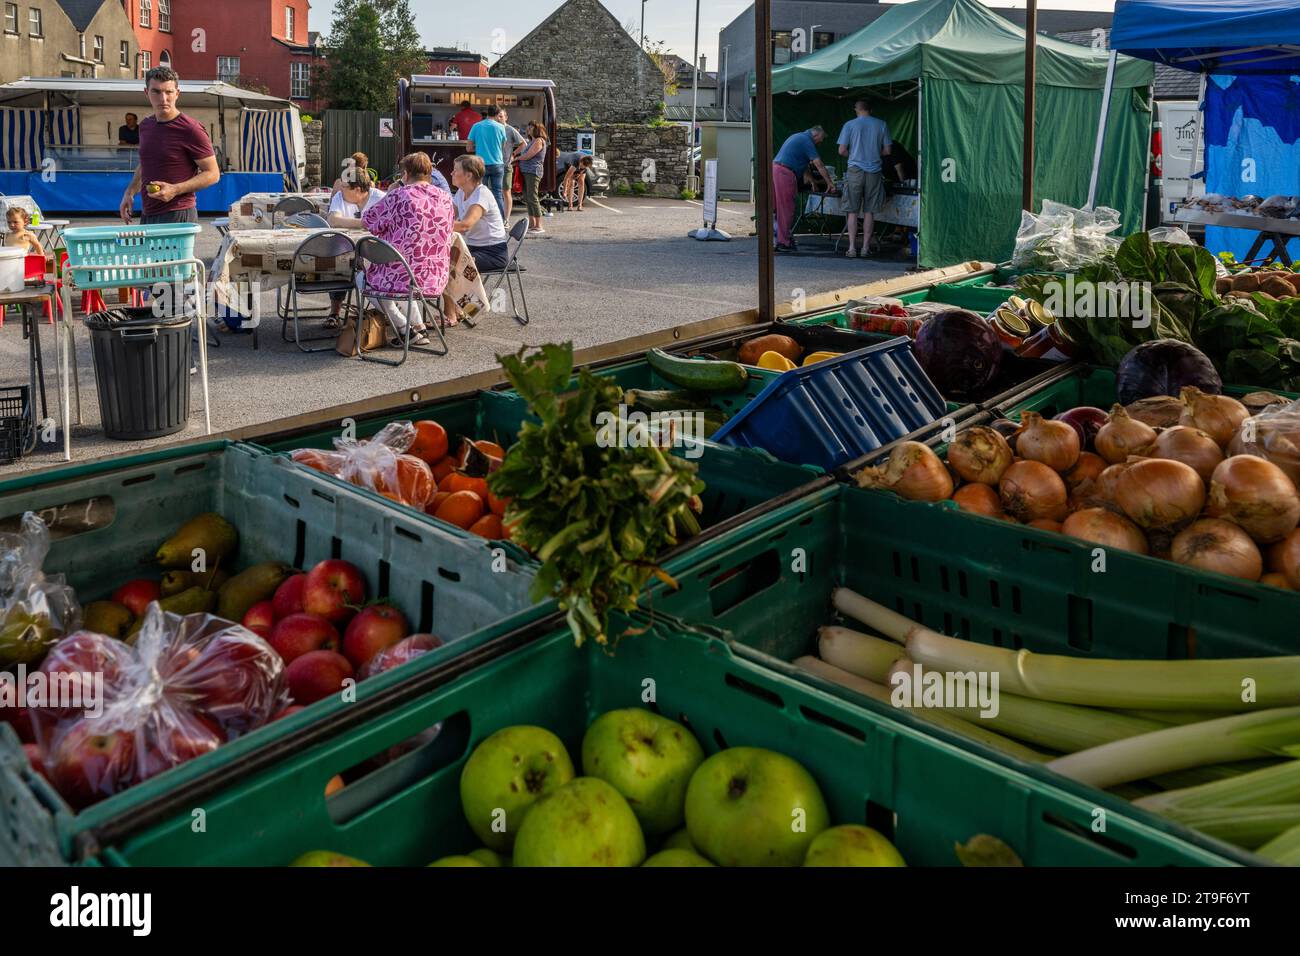 Fruit and veg stall at a country market, Bandon, West Cork, Ireland. Stock Photo